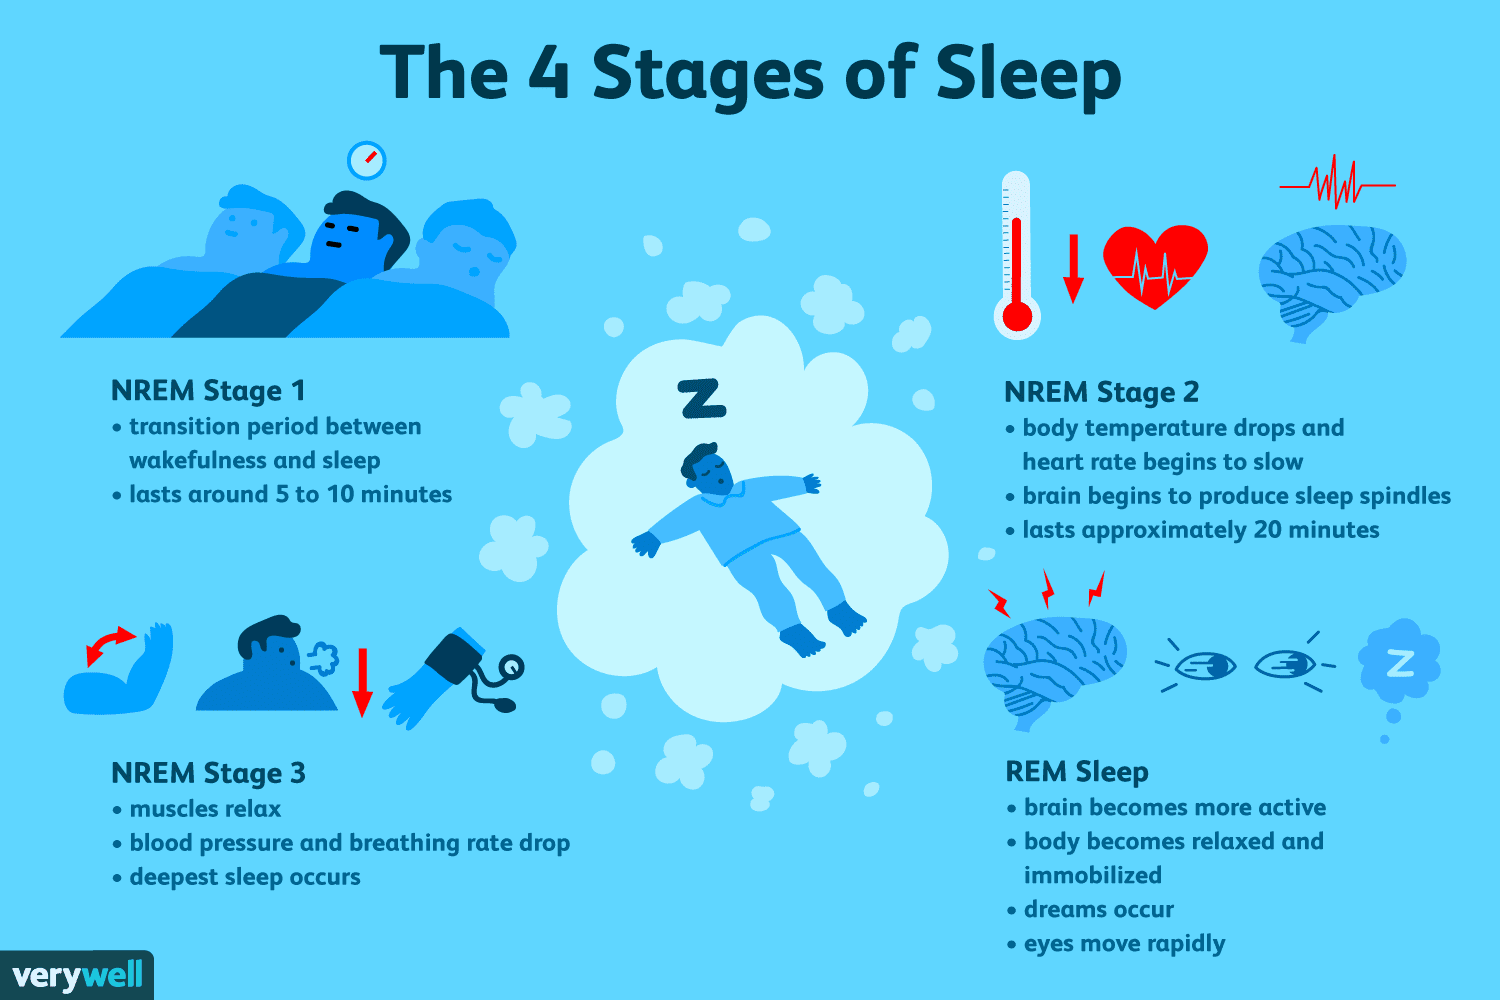 The 4 Stages of Sleep (NREM and REM Sleep Cycles)